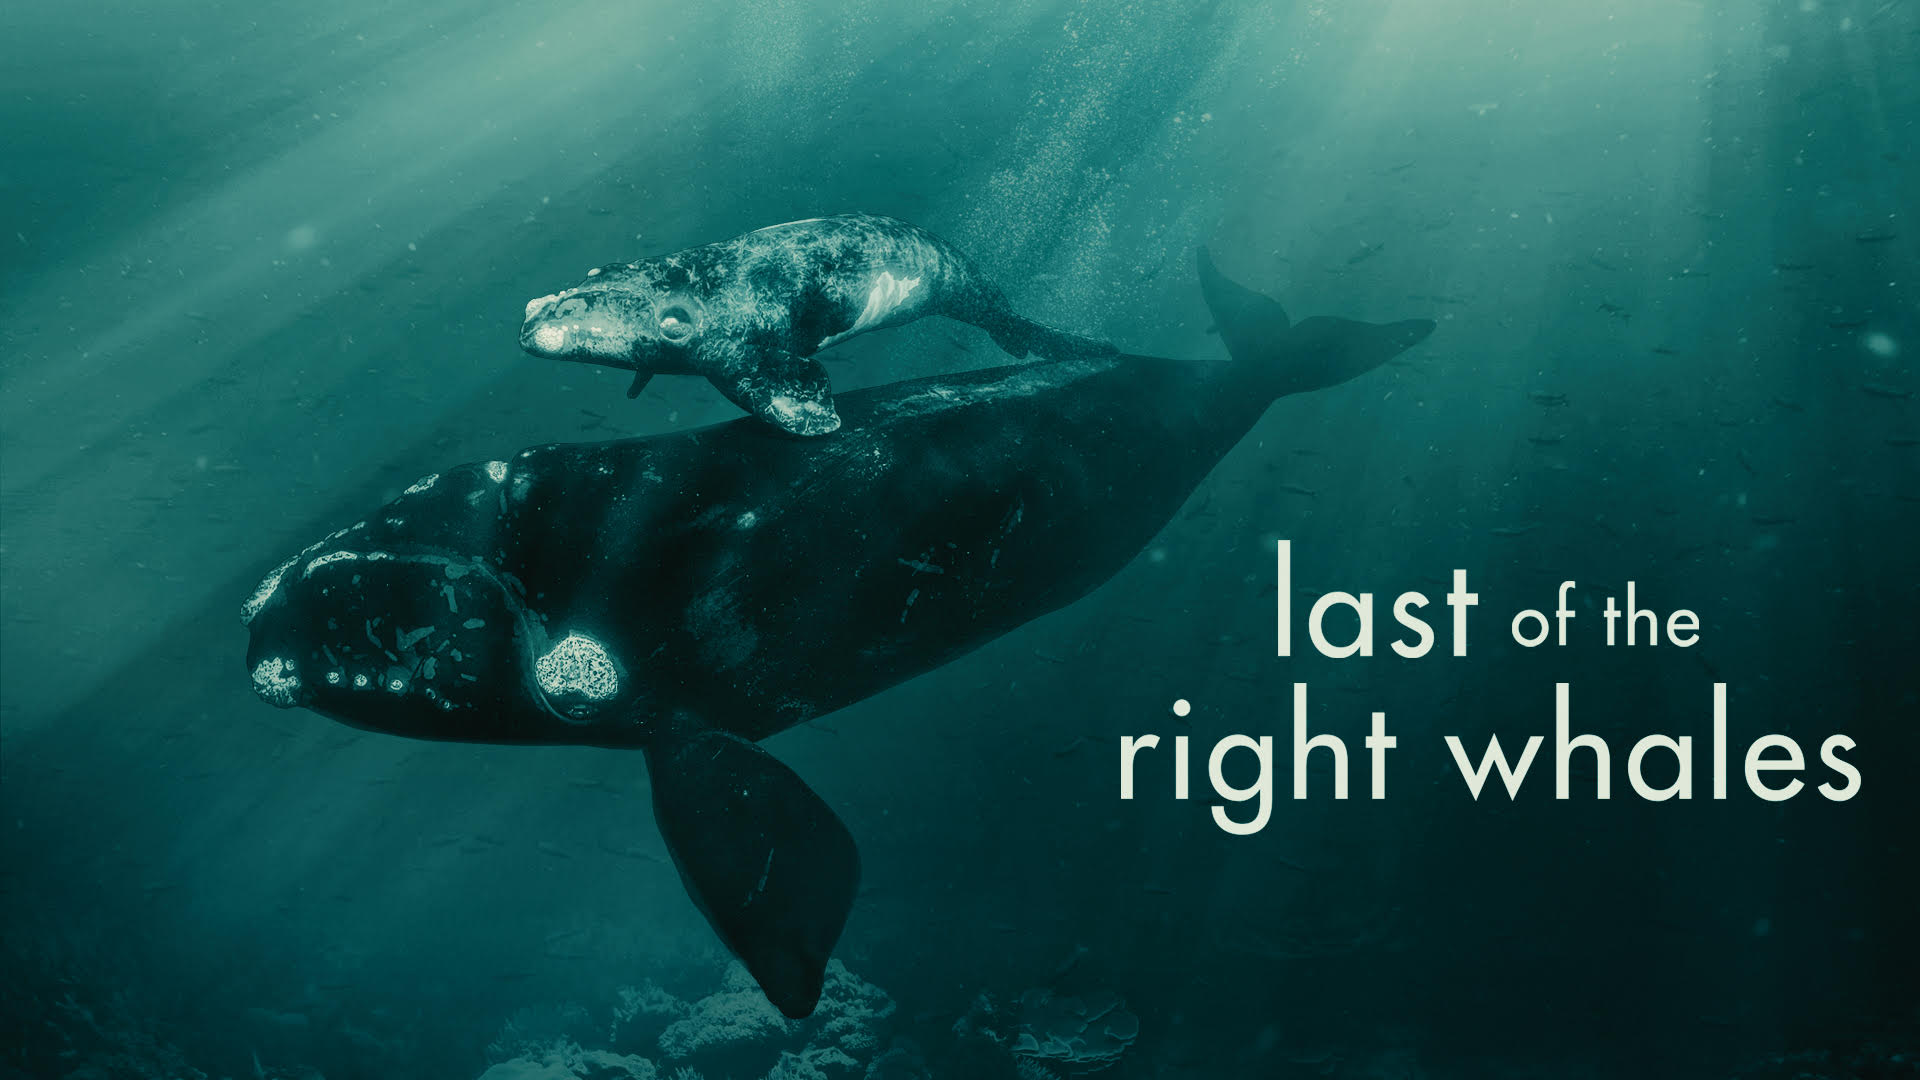 The poster for the Last of the Right Whales. There is an image depicting a right whale with its young. The text reads "Last of the Right Whales"